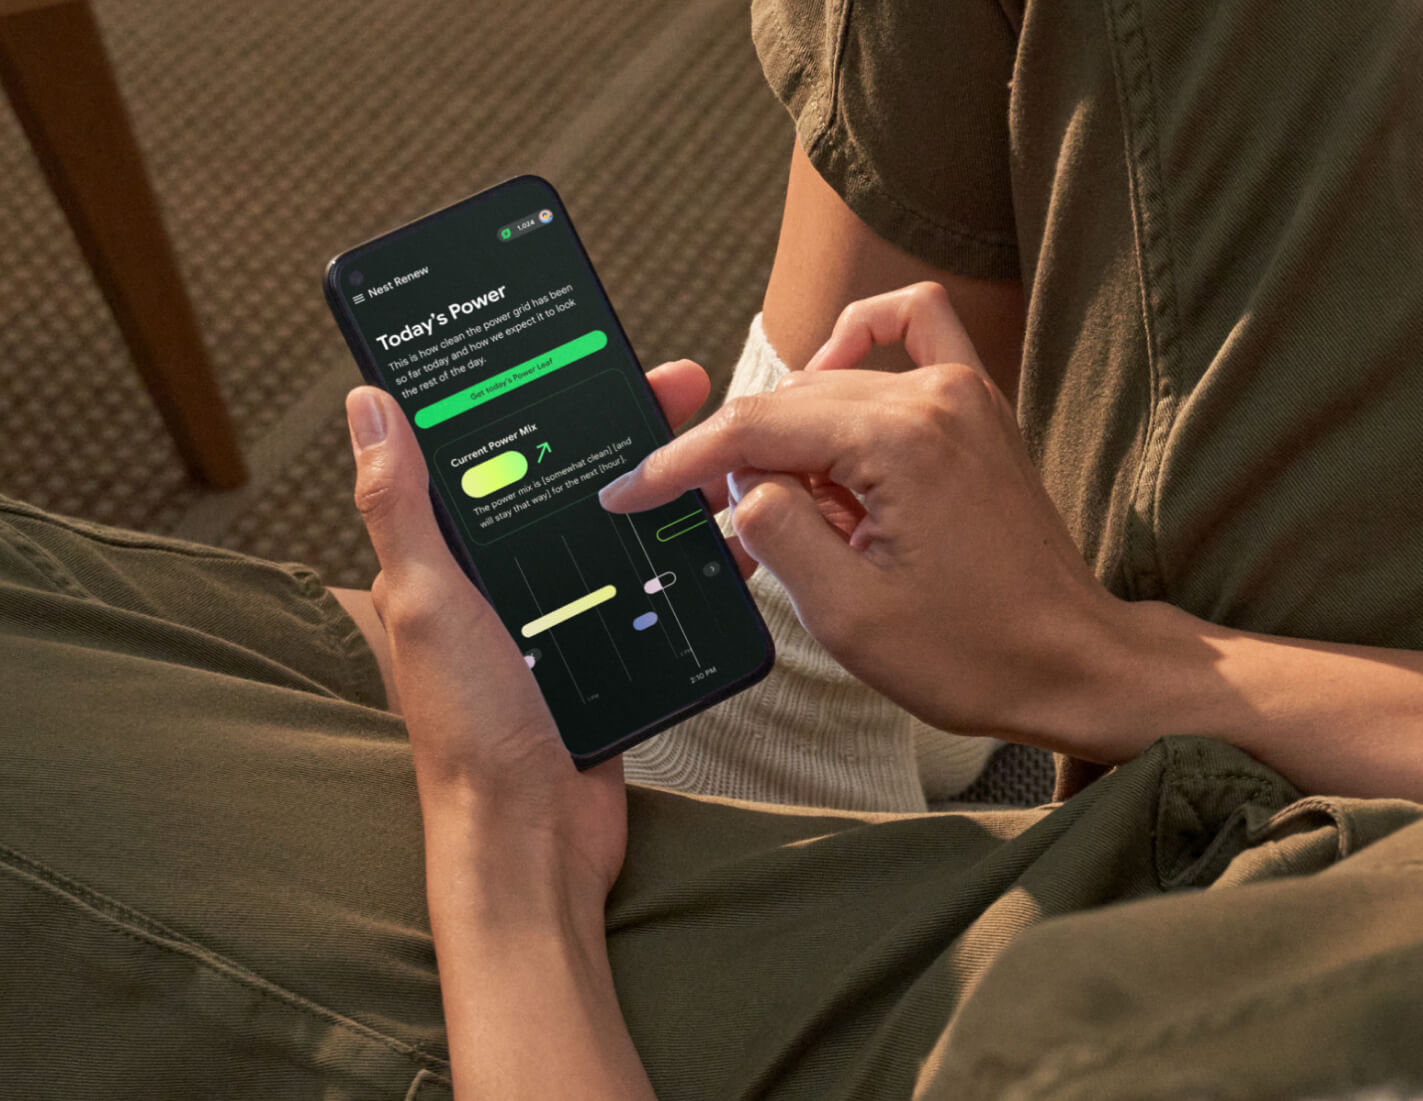 An image of a person viewing the mobile Nest dashboard on their phone.